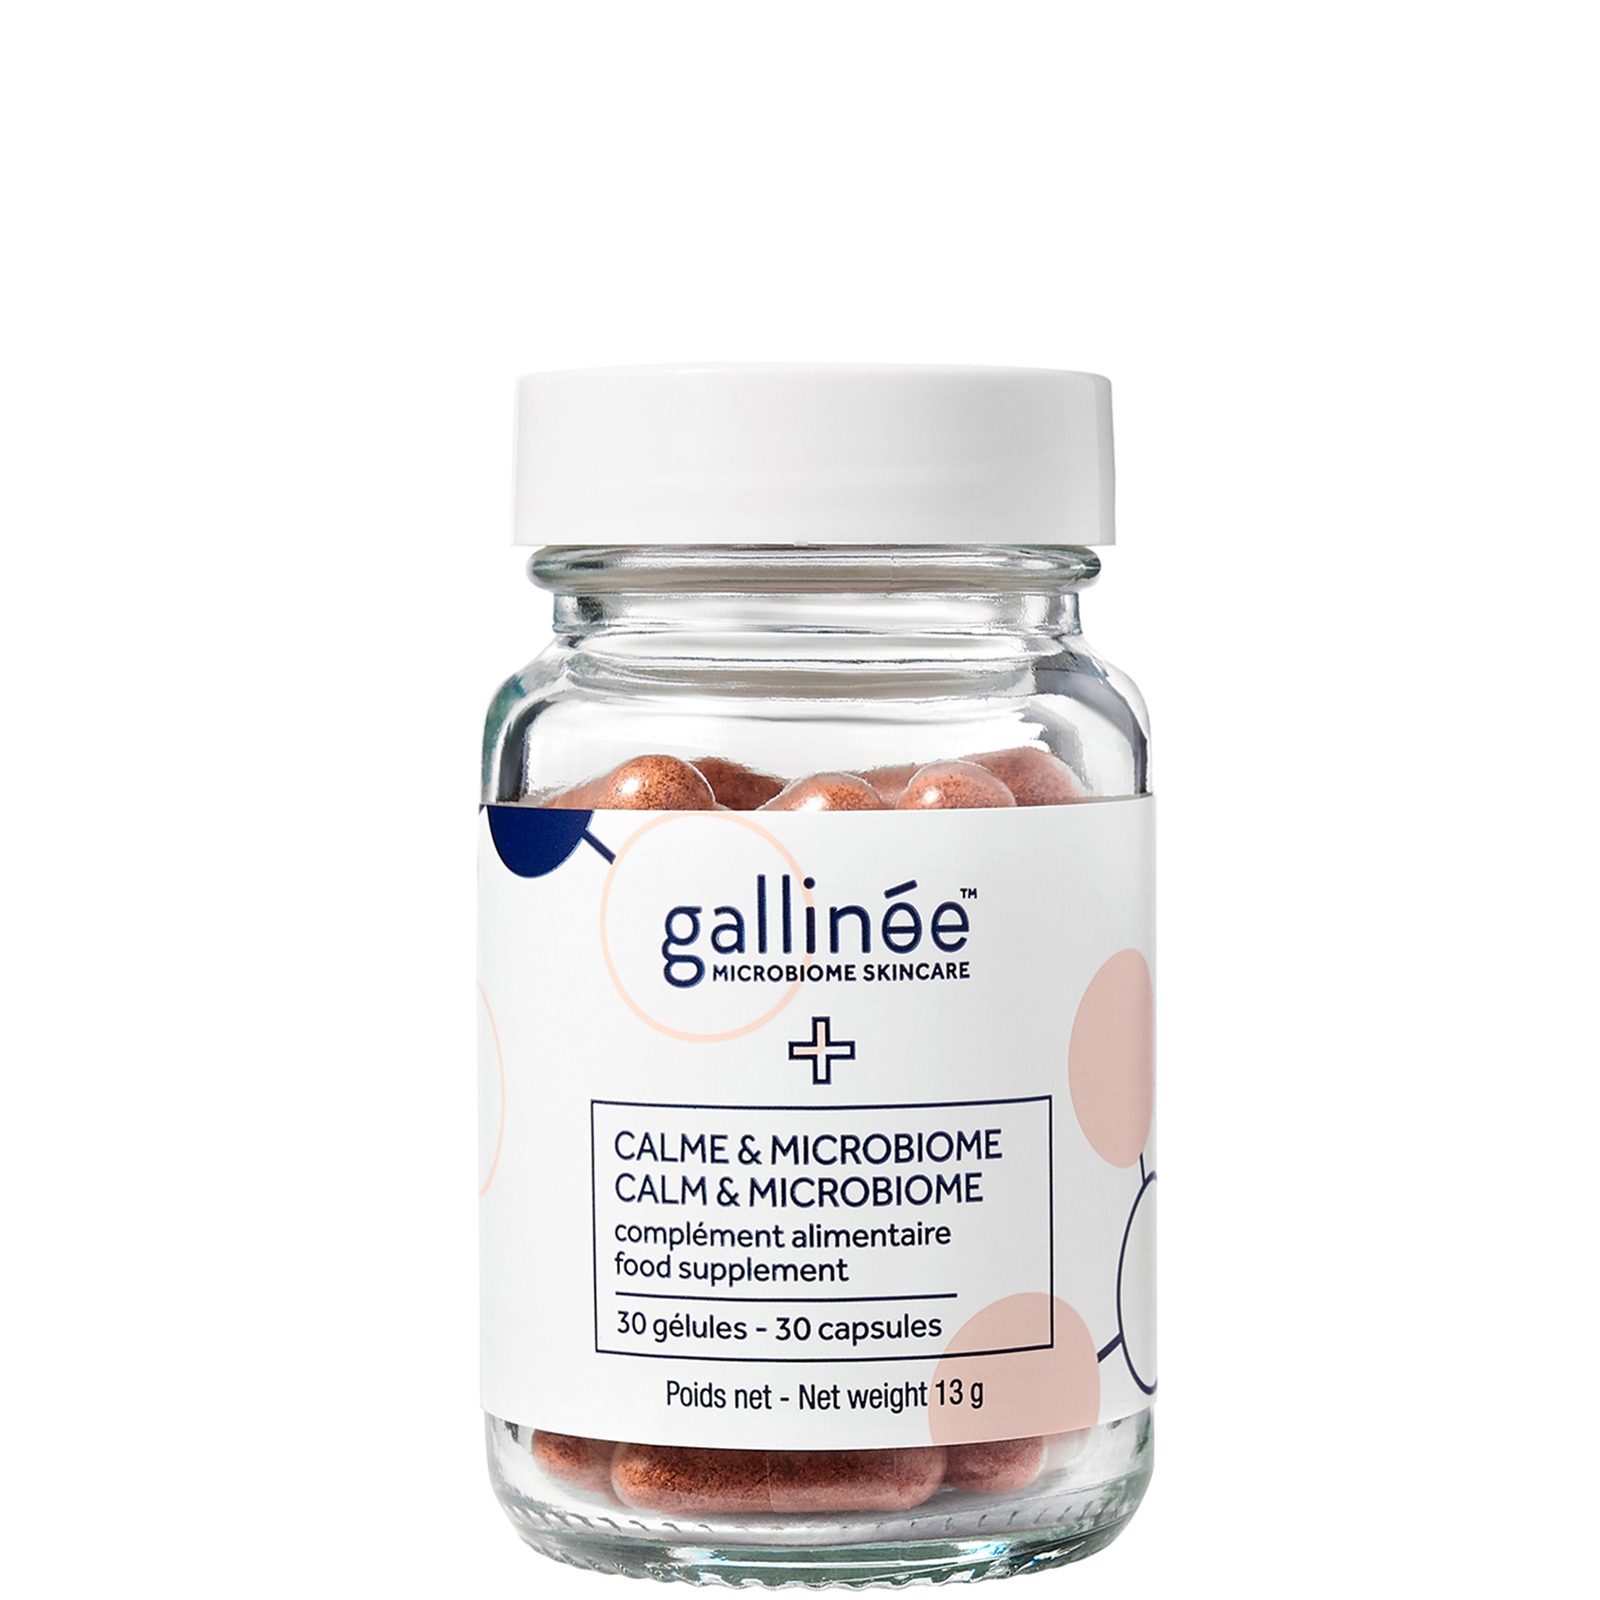 Gallinee Calm & Microbiome Supplement